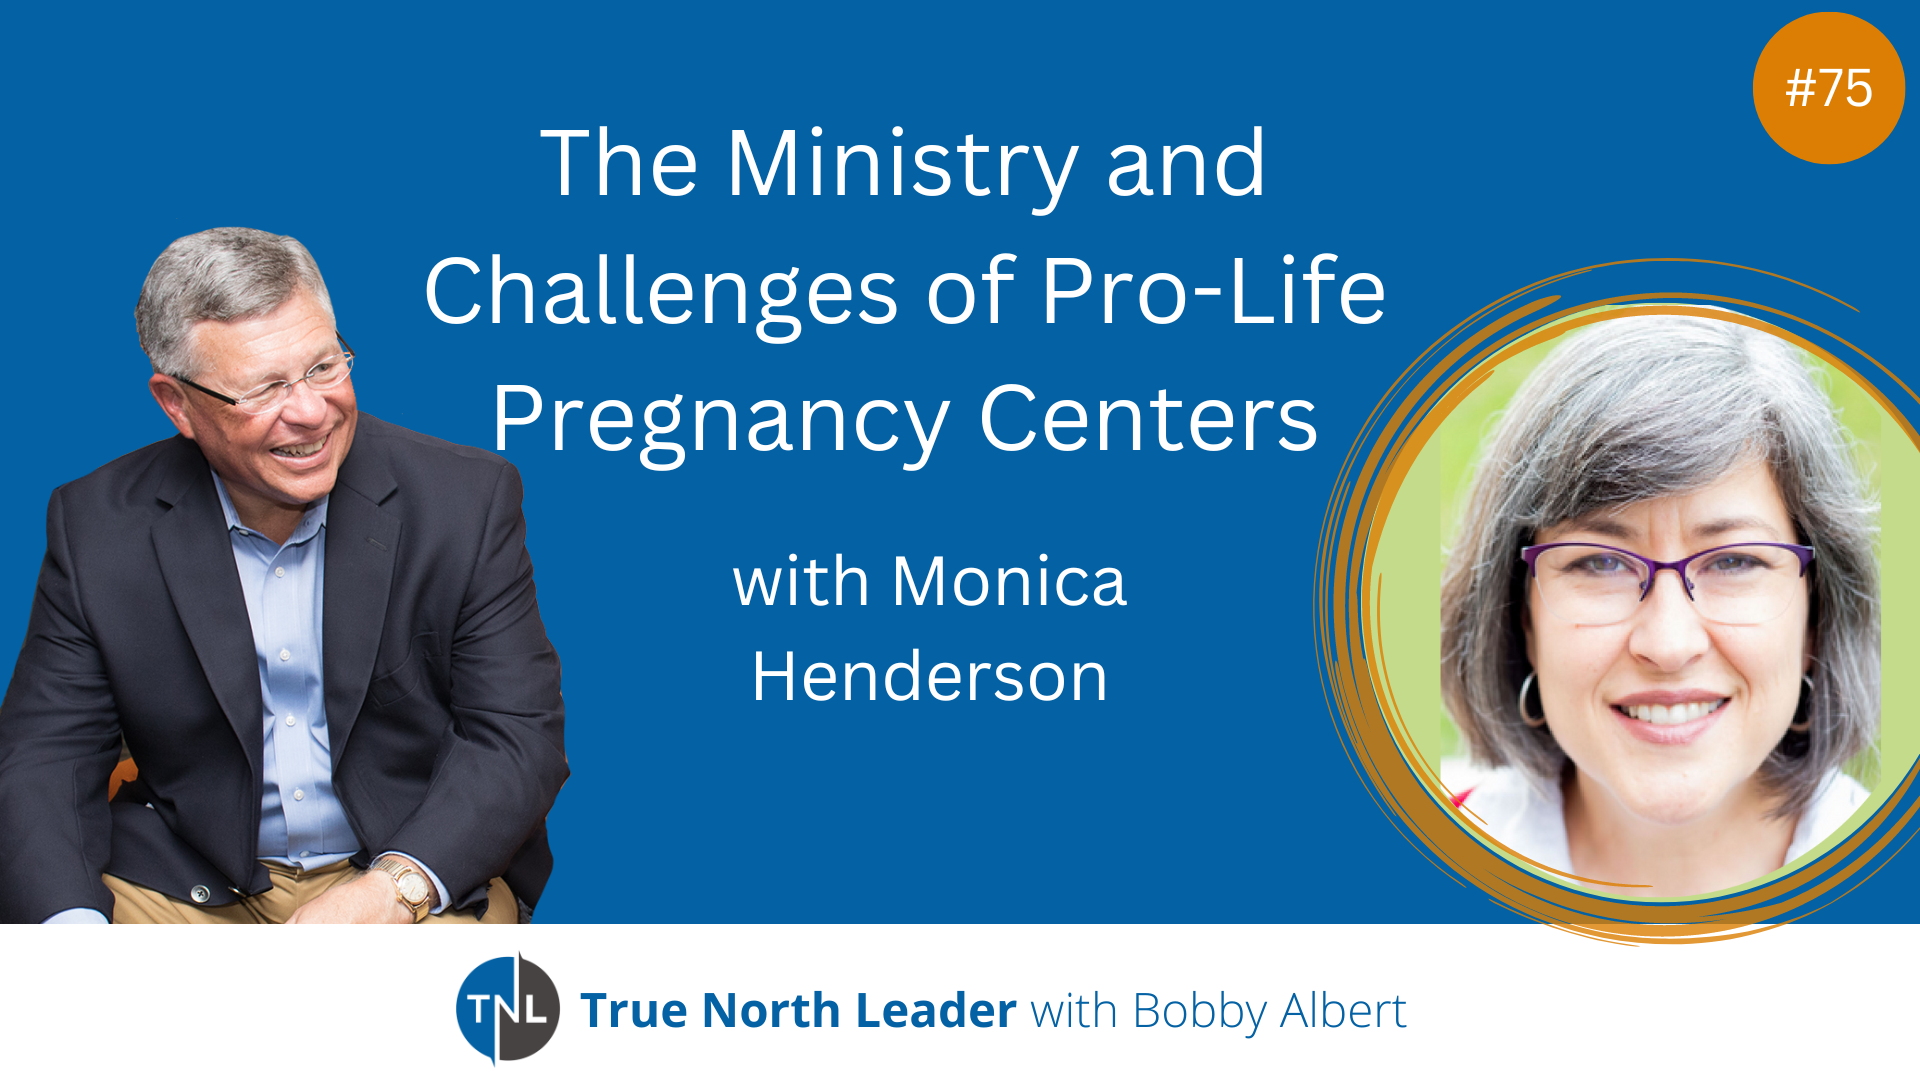 The Ministry and Pro-Life Pregnancy Centers with Monica Henderson